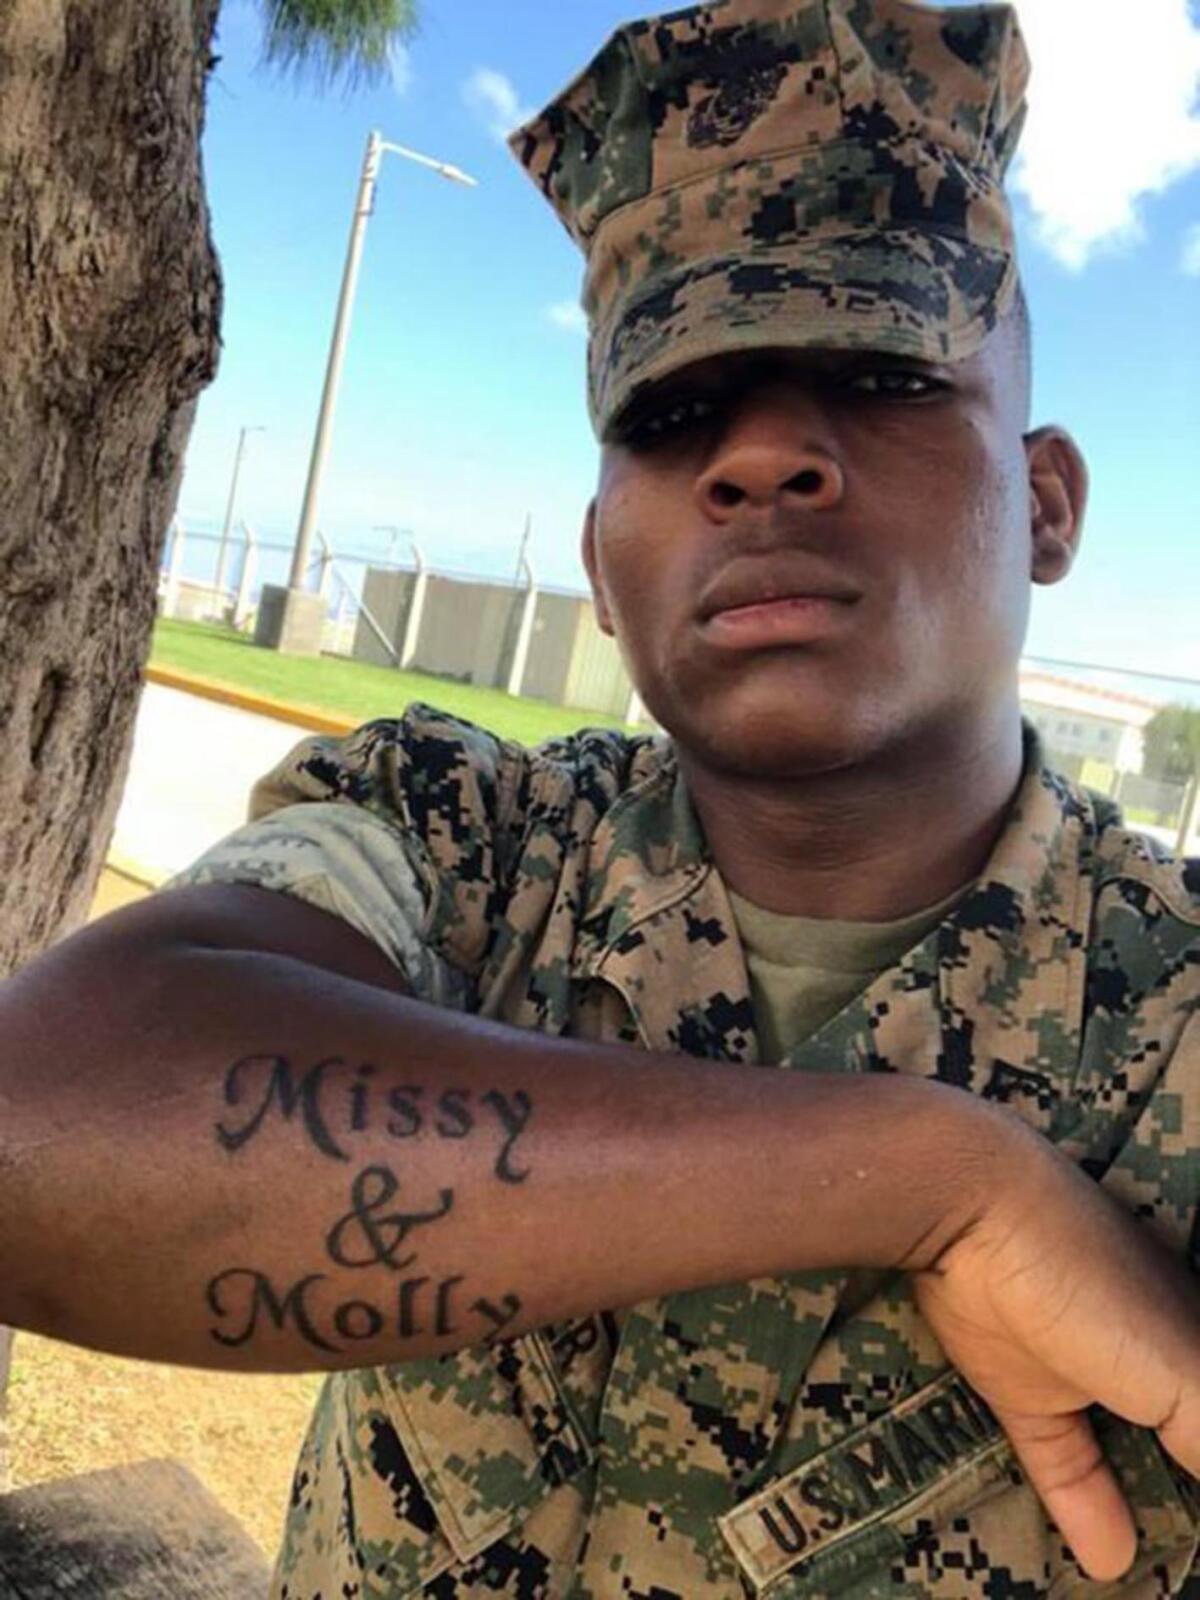 Keivonn Monger showcases a tattoo he received in 2018 of the names of his two foster parents.